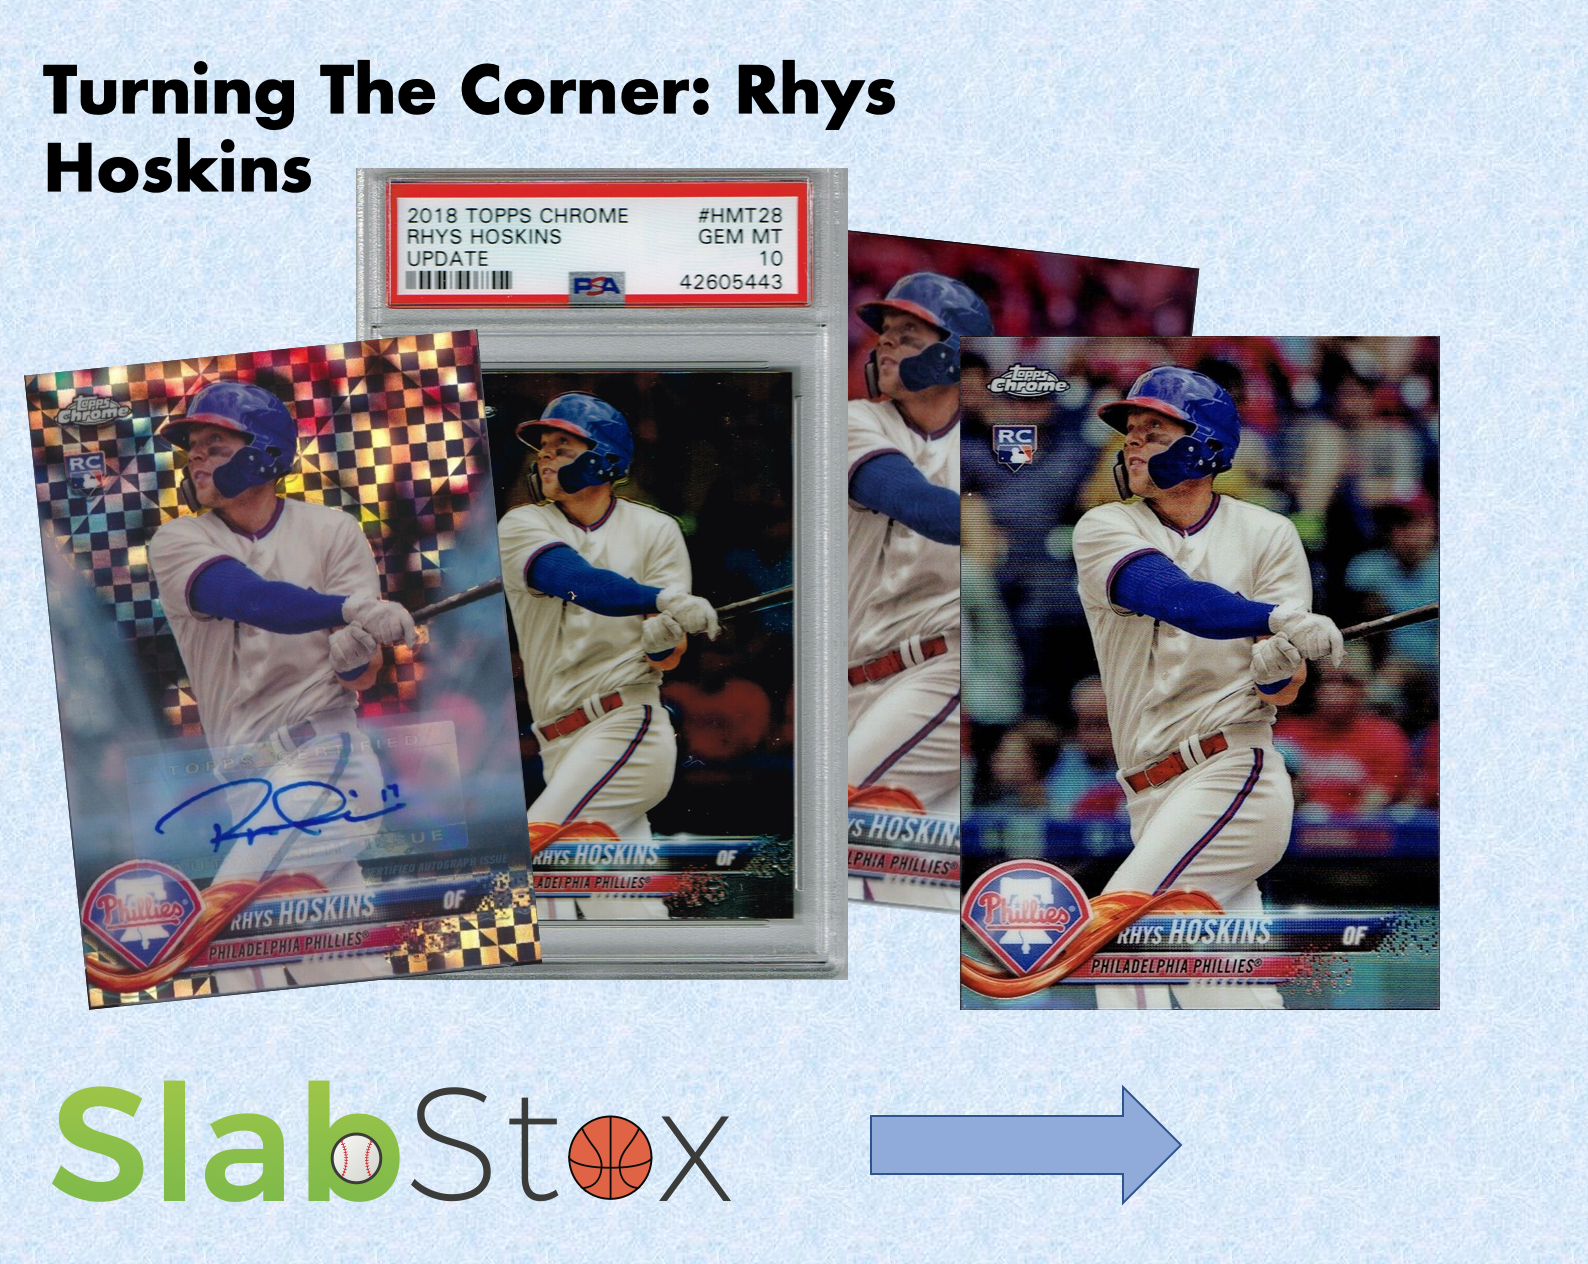 Graphic of different Rhys Hoskins cards by SlabStox that says "Turning The Corner"